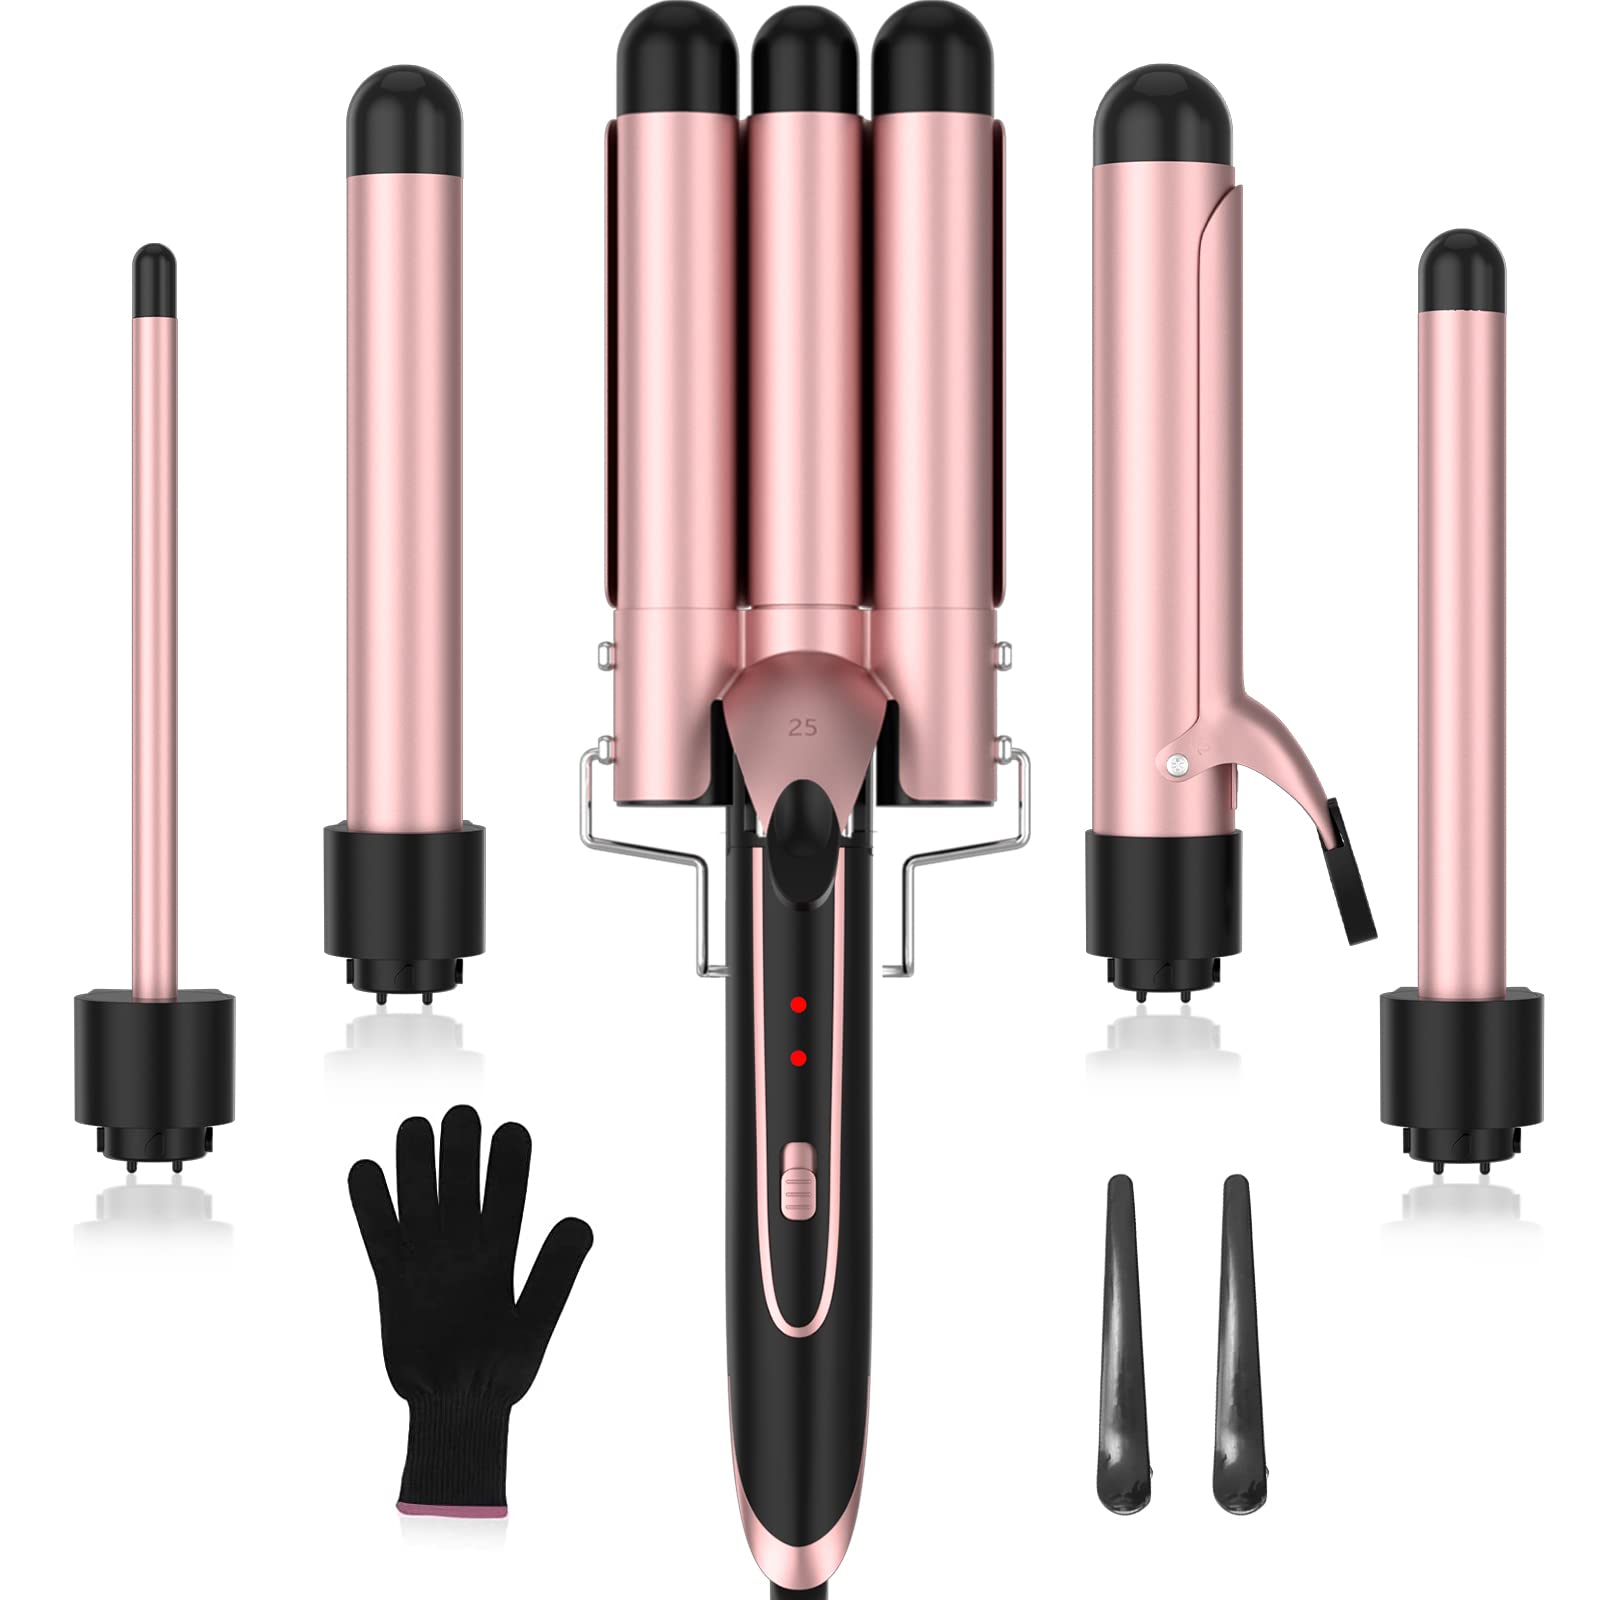 IORAB Curling Iron, 5 In 1 Curling Wand Set With 1 3 Barrel Hair Crimper Hair Waver  4 Interchangeable Barrel, 2 Temps, Instant Heatin